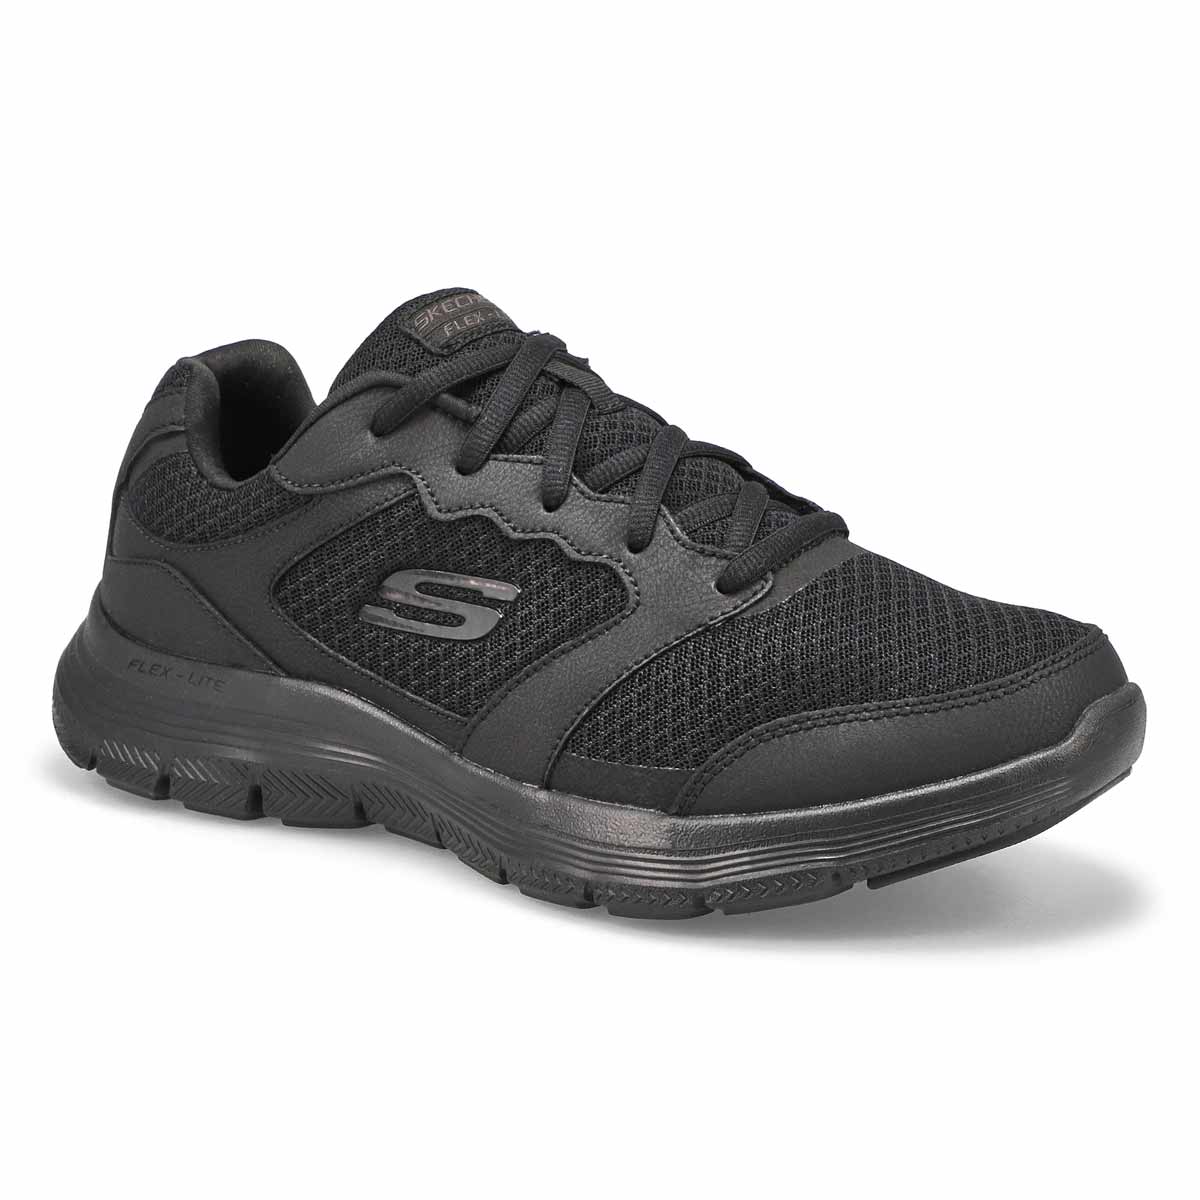 skechers where to buy canada